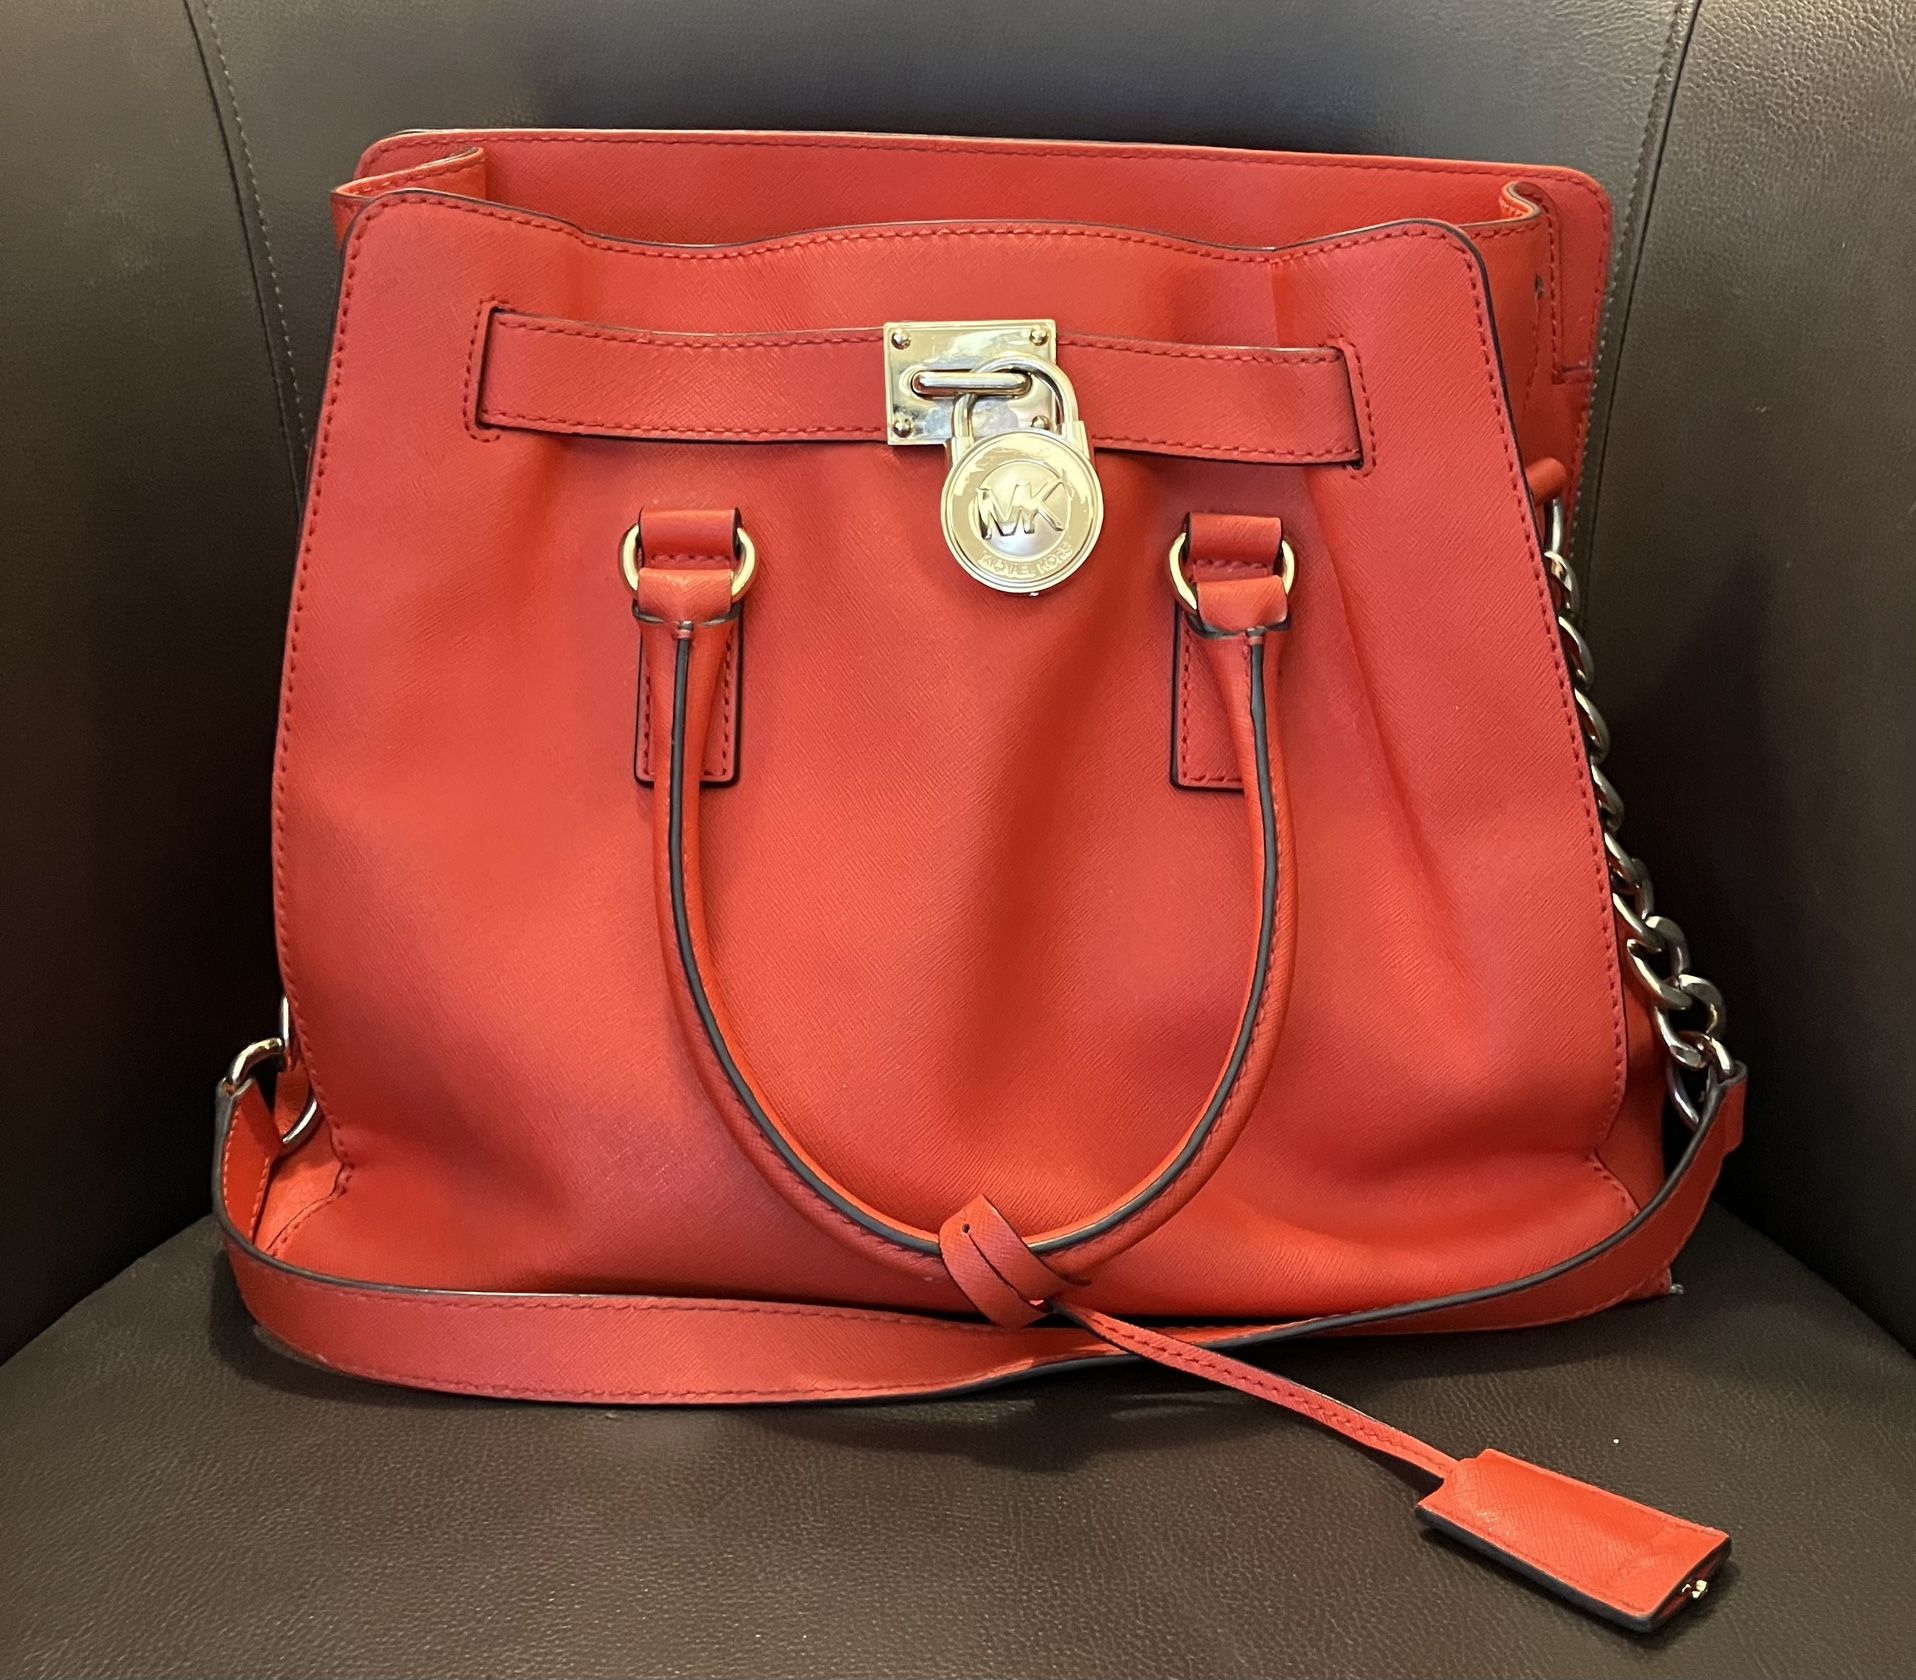 Micheal Kors Hamilton Large Red Leather Purse